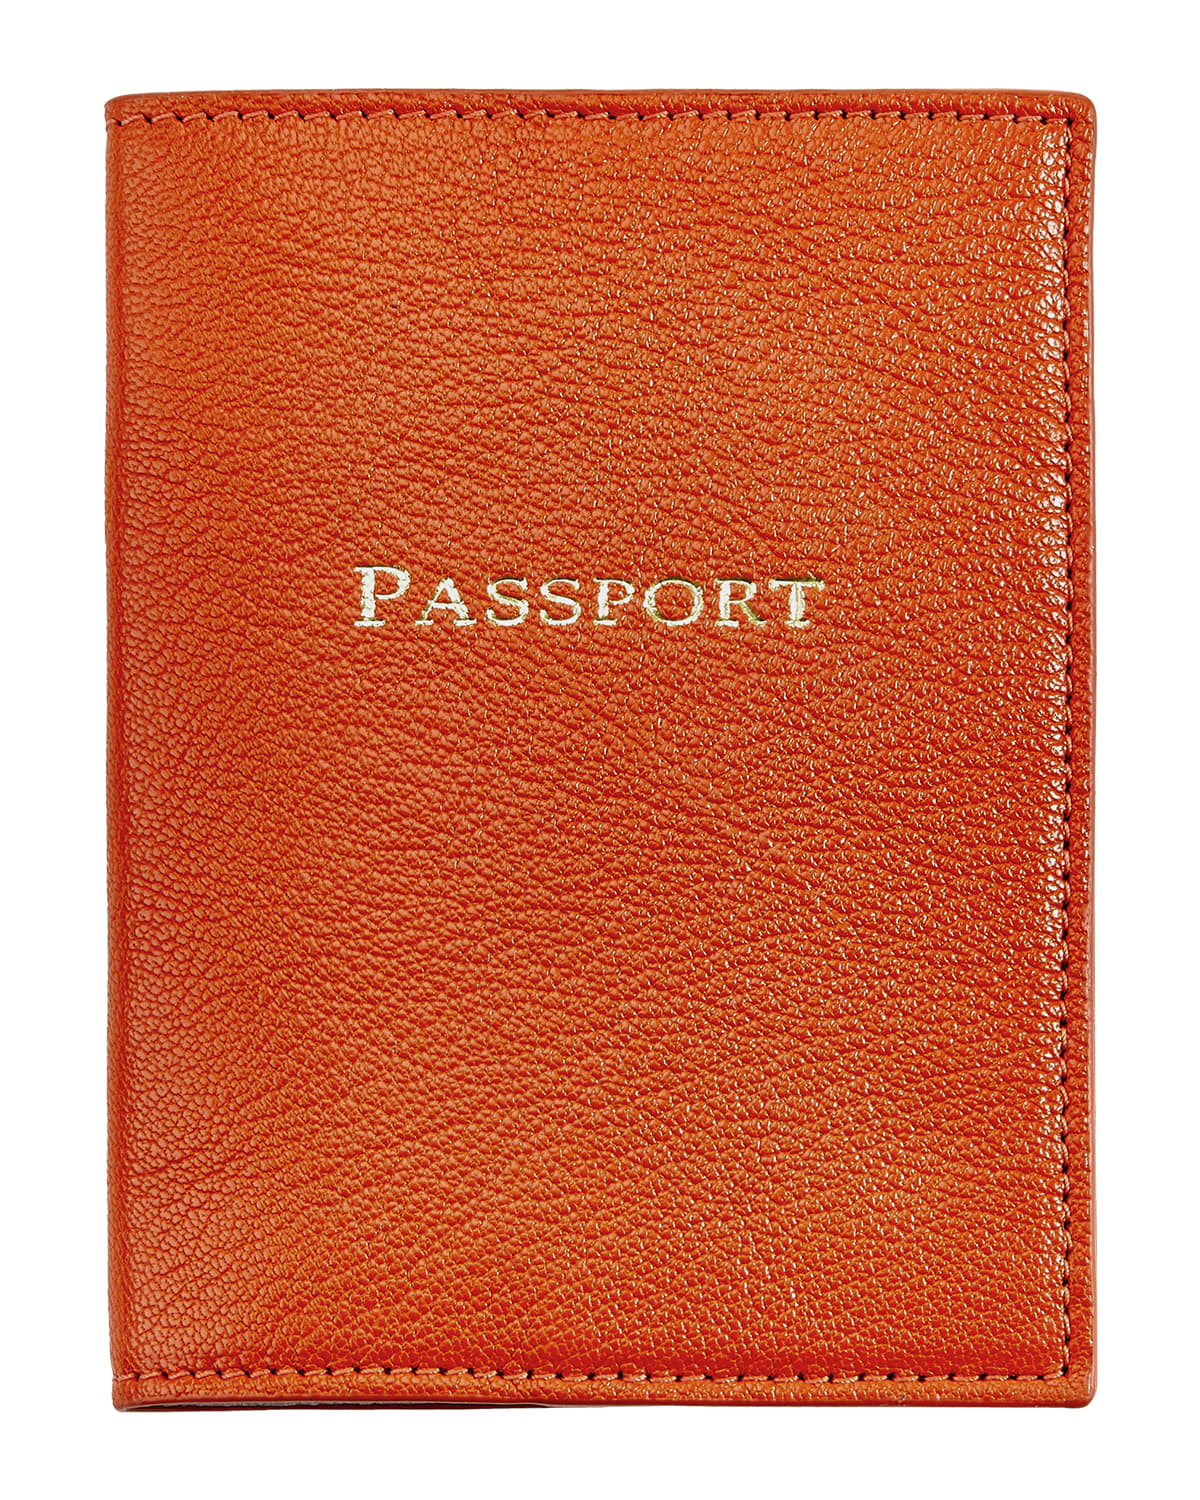 New Leather Luxury Passport Holder Real Genuine Croc print Leather Case Pouch 